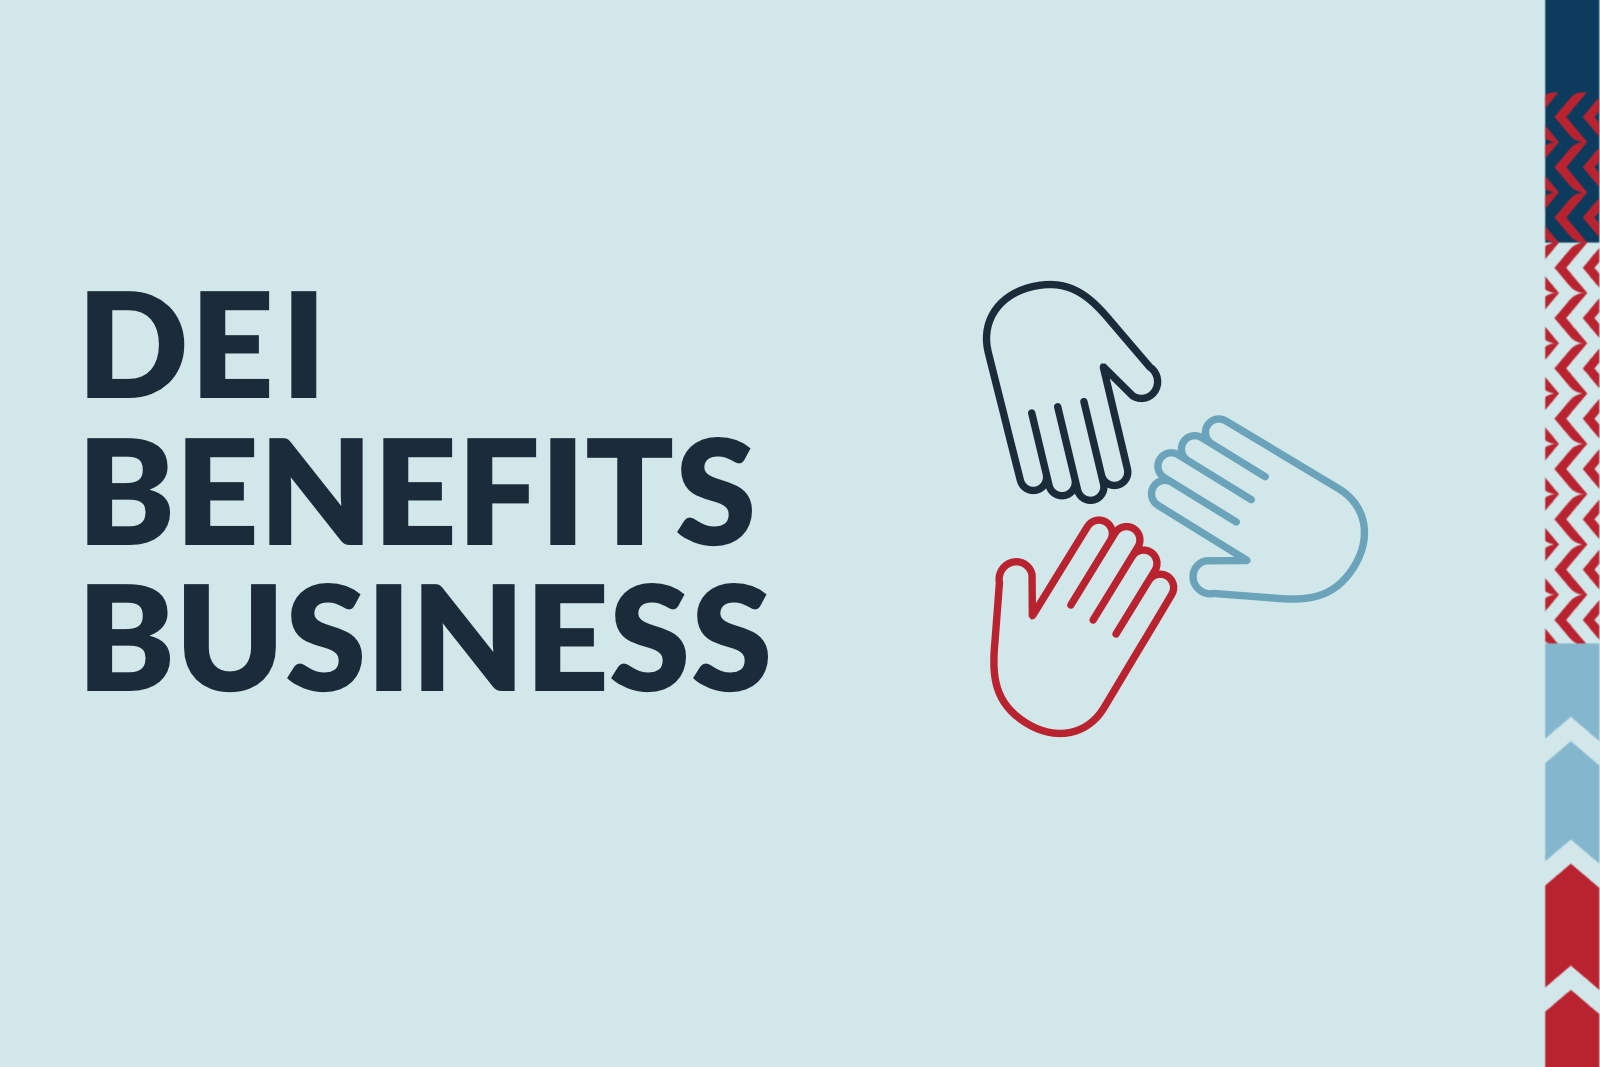 DEI Benefits Business Article Featured Image